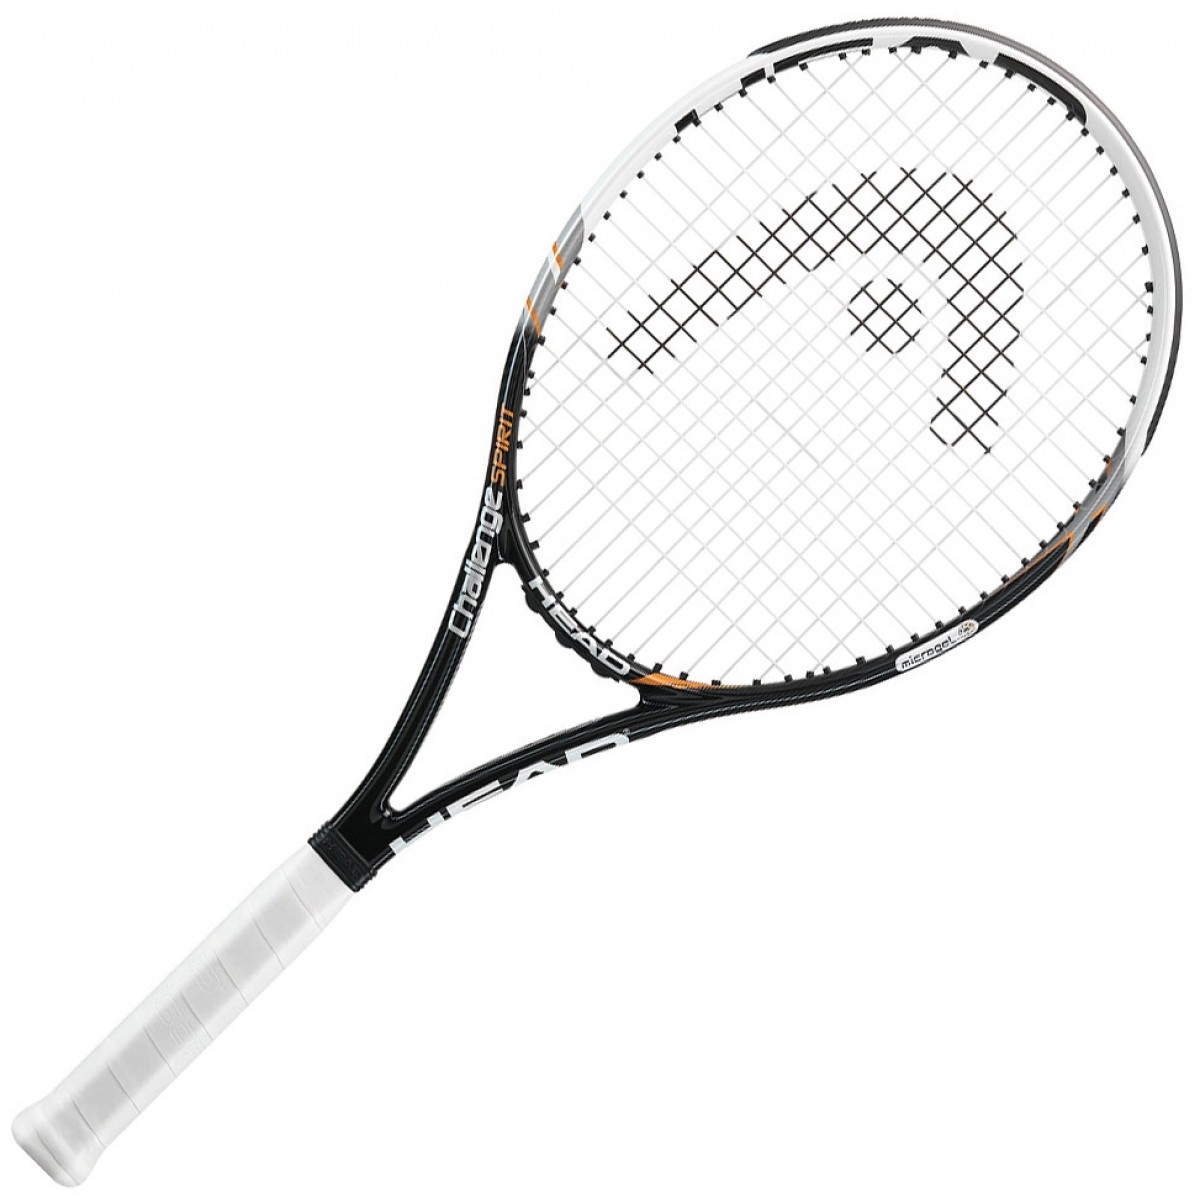 Picture Of Tennis Racquet - Clipart library